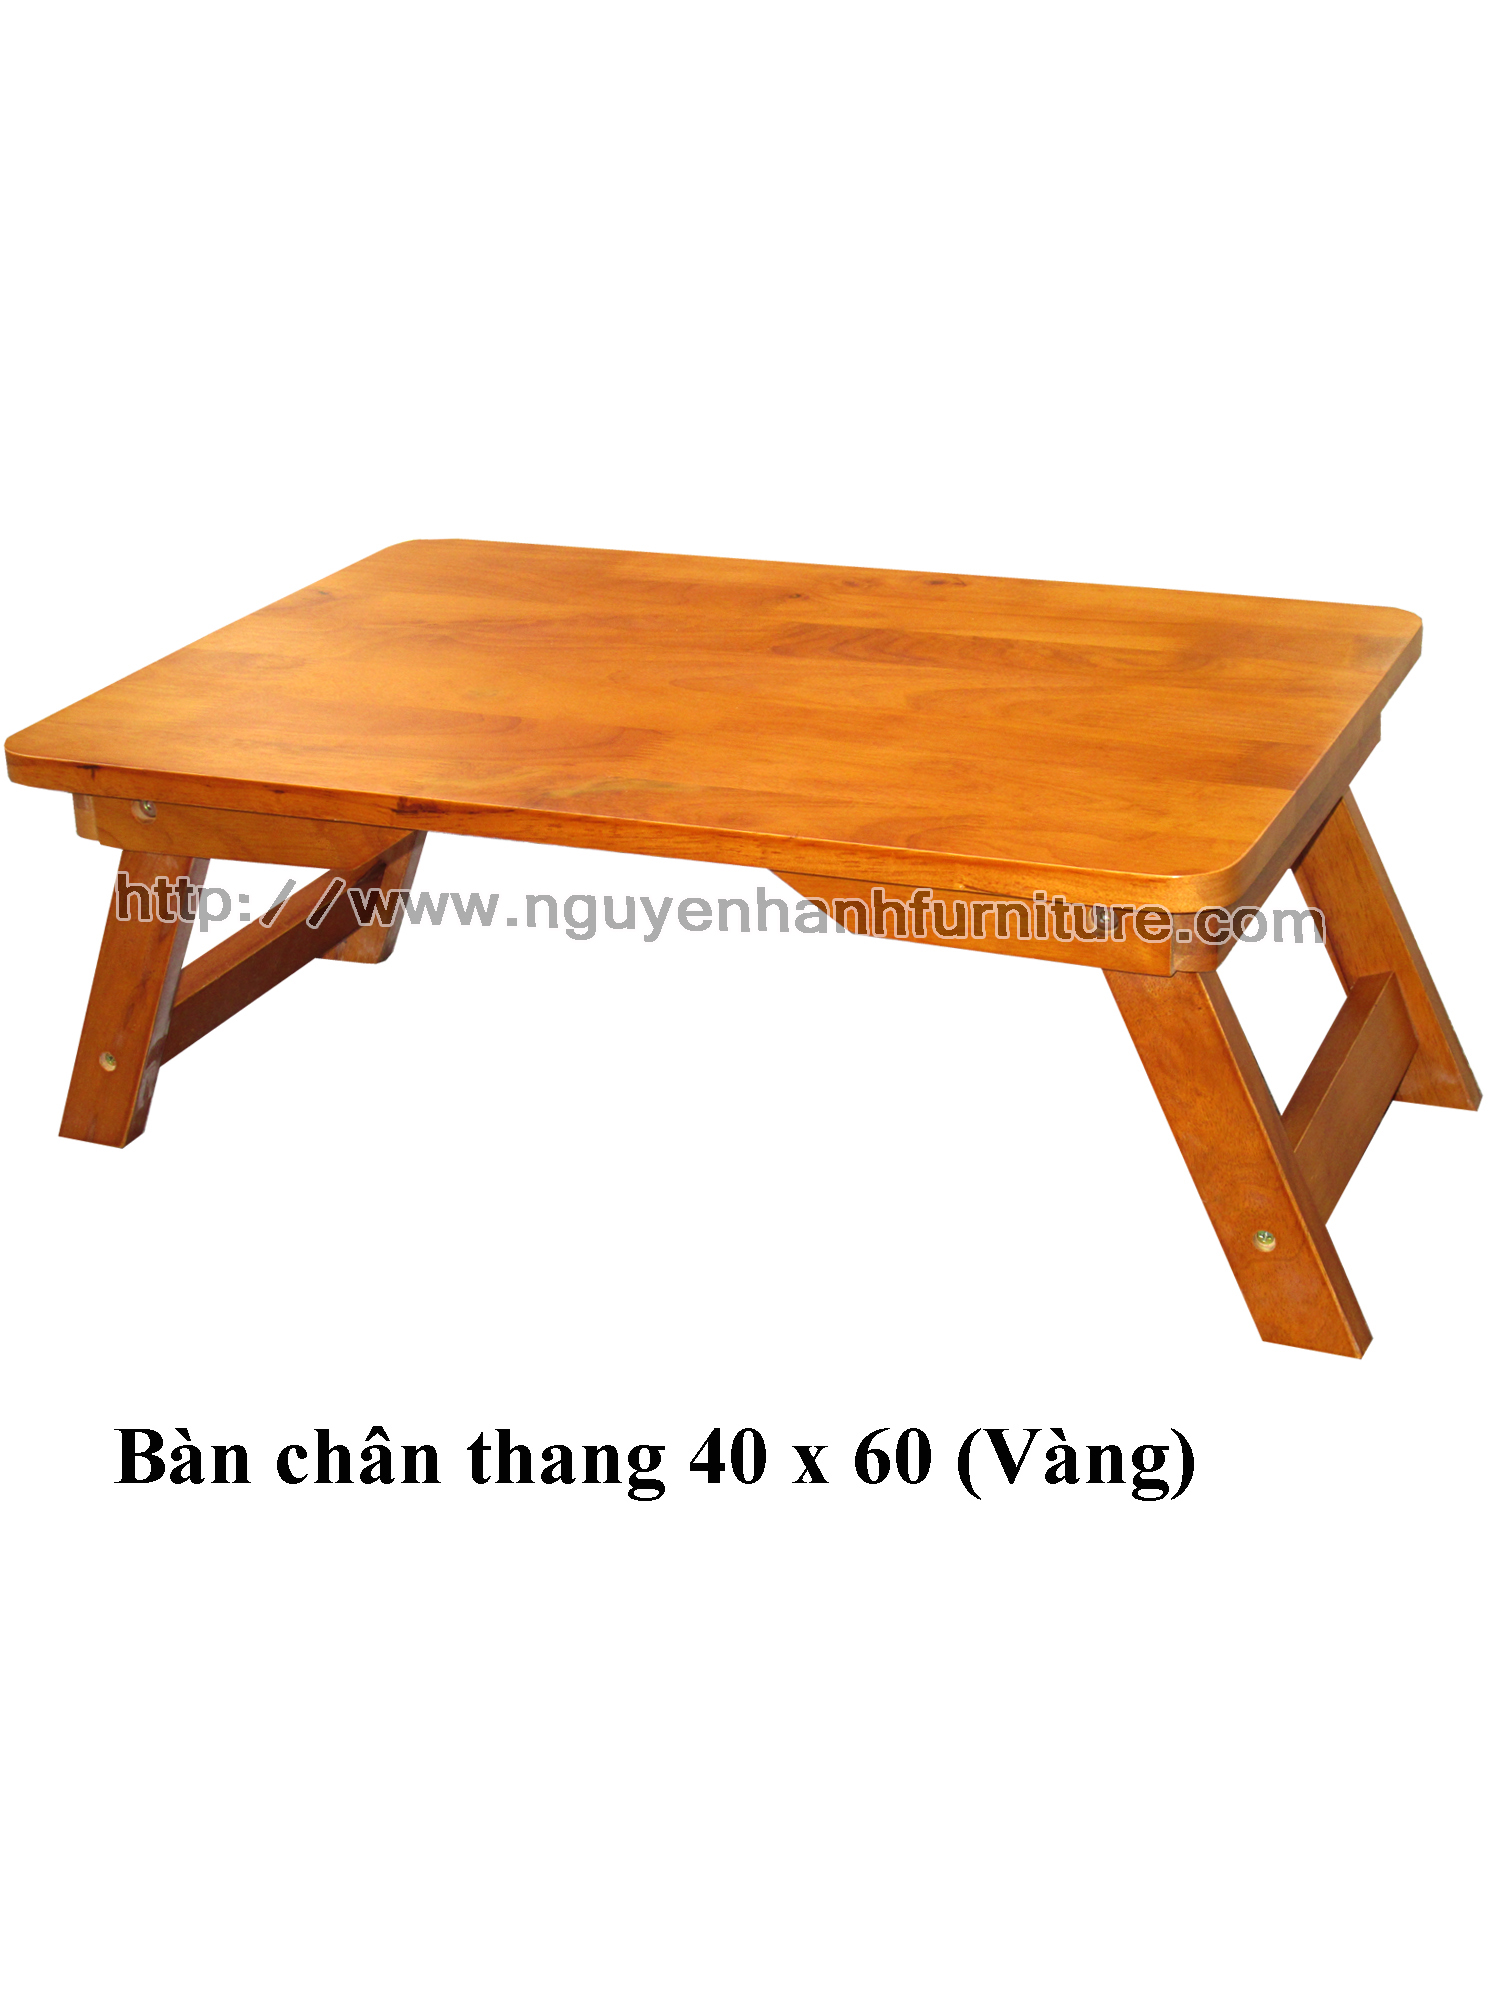 Name product: 4 x 6 Tea table with ladder shape legs (Yellow) - Dimensions: 40 x 60 x 24 (H) - Description: Wood natural rubber